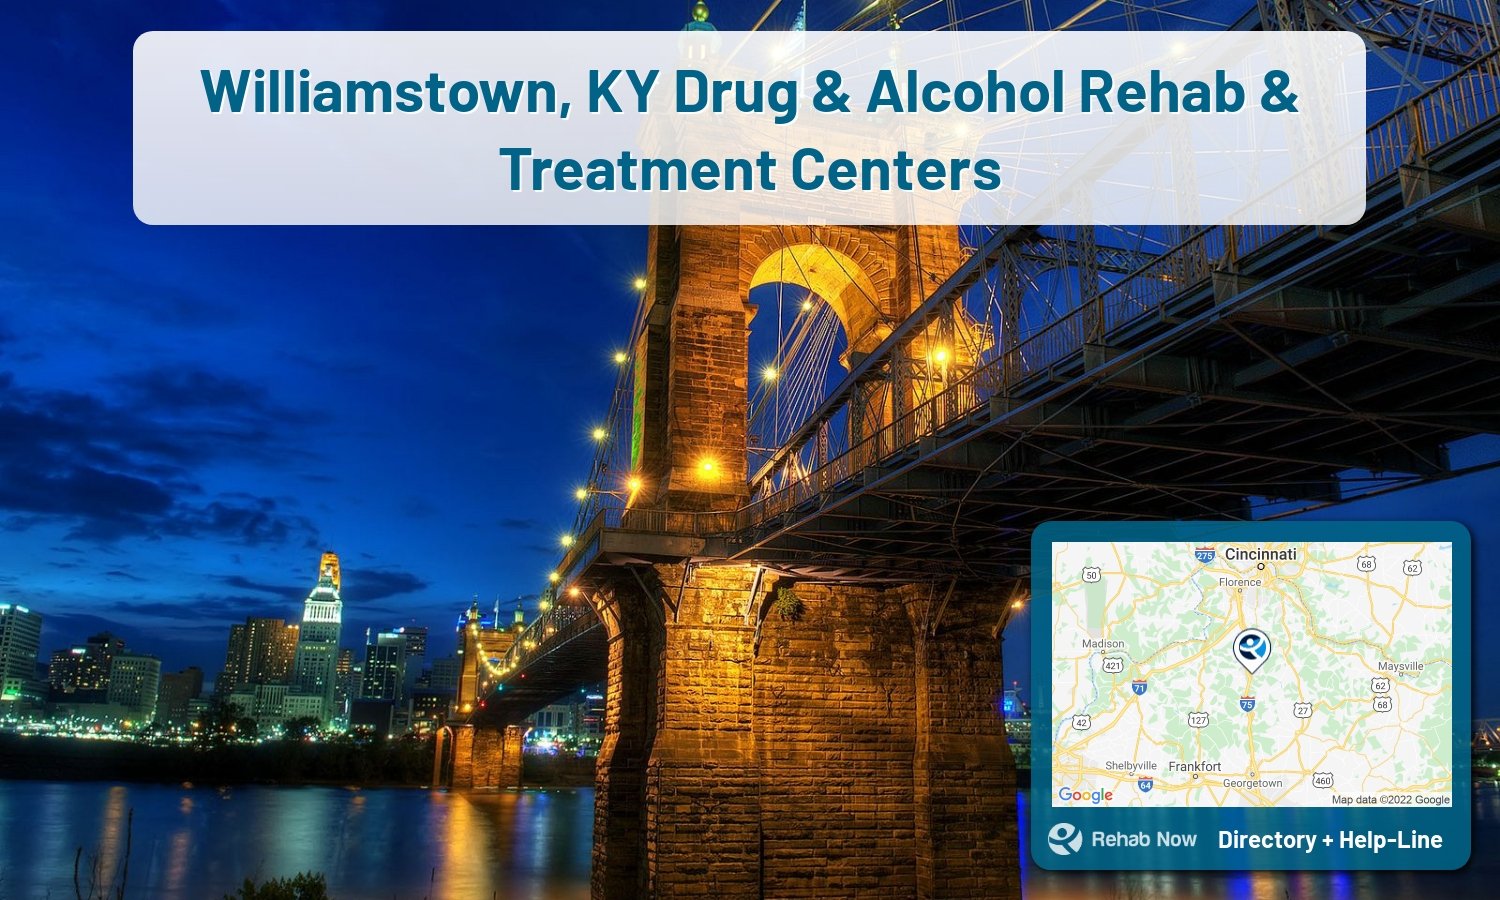 View options, availability, treatment methods, and more, for drug rehab and alcohol treatment in Williamstown, Kentucky